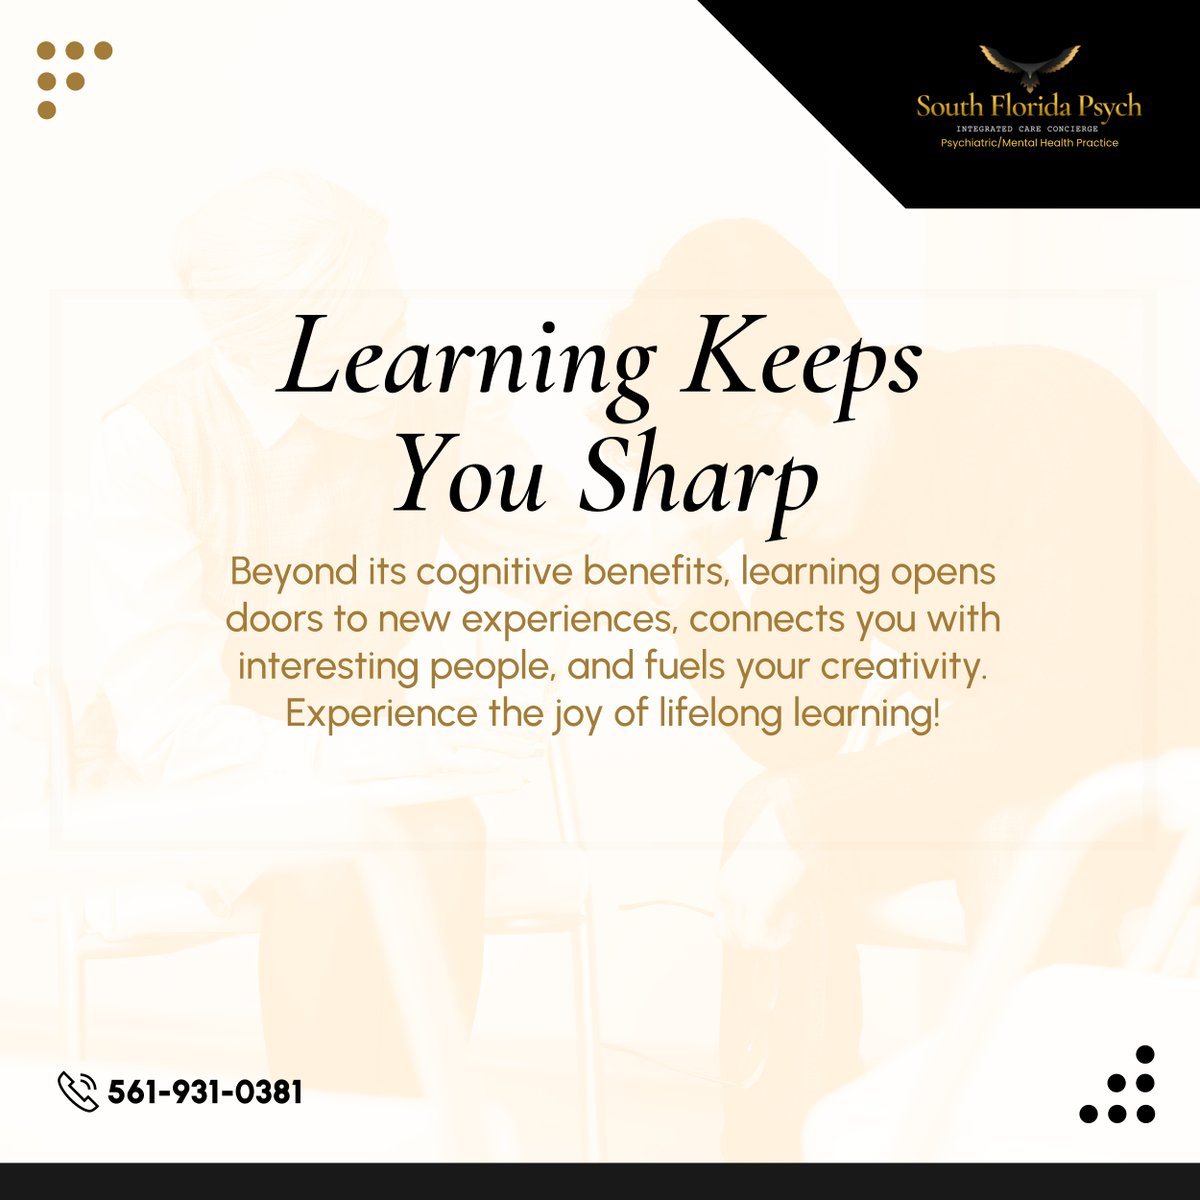 Here's something to share with others: Challenging your brain by learning new things can greatly improve cognitive function, boost memory, and even prevent cognitive decline. Learning is the ultimate brain food! 

#BocaRatonFlorida #MentalHealthServices #LifelongLearning